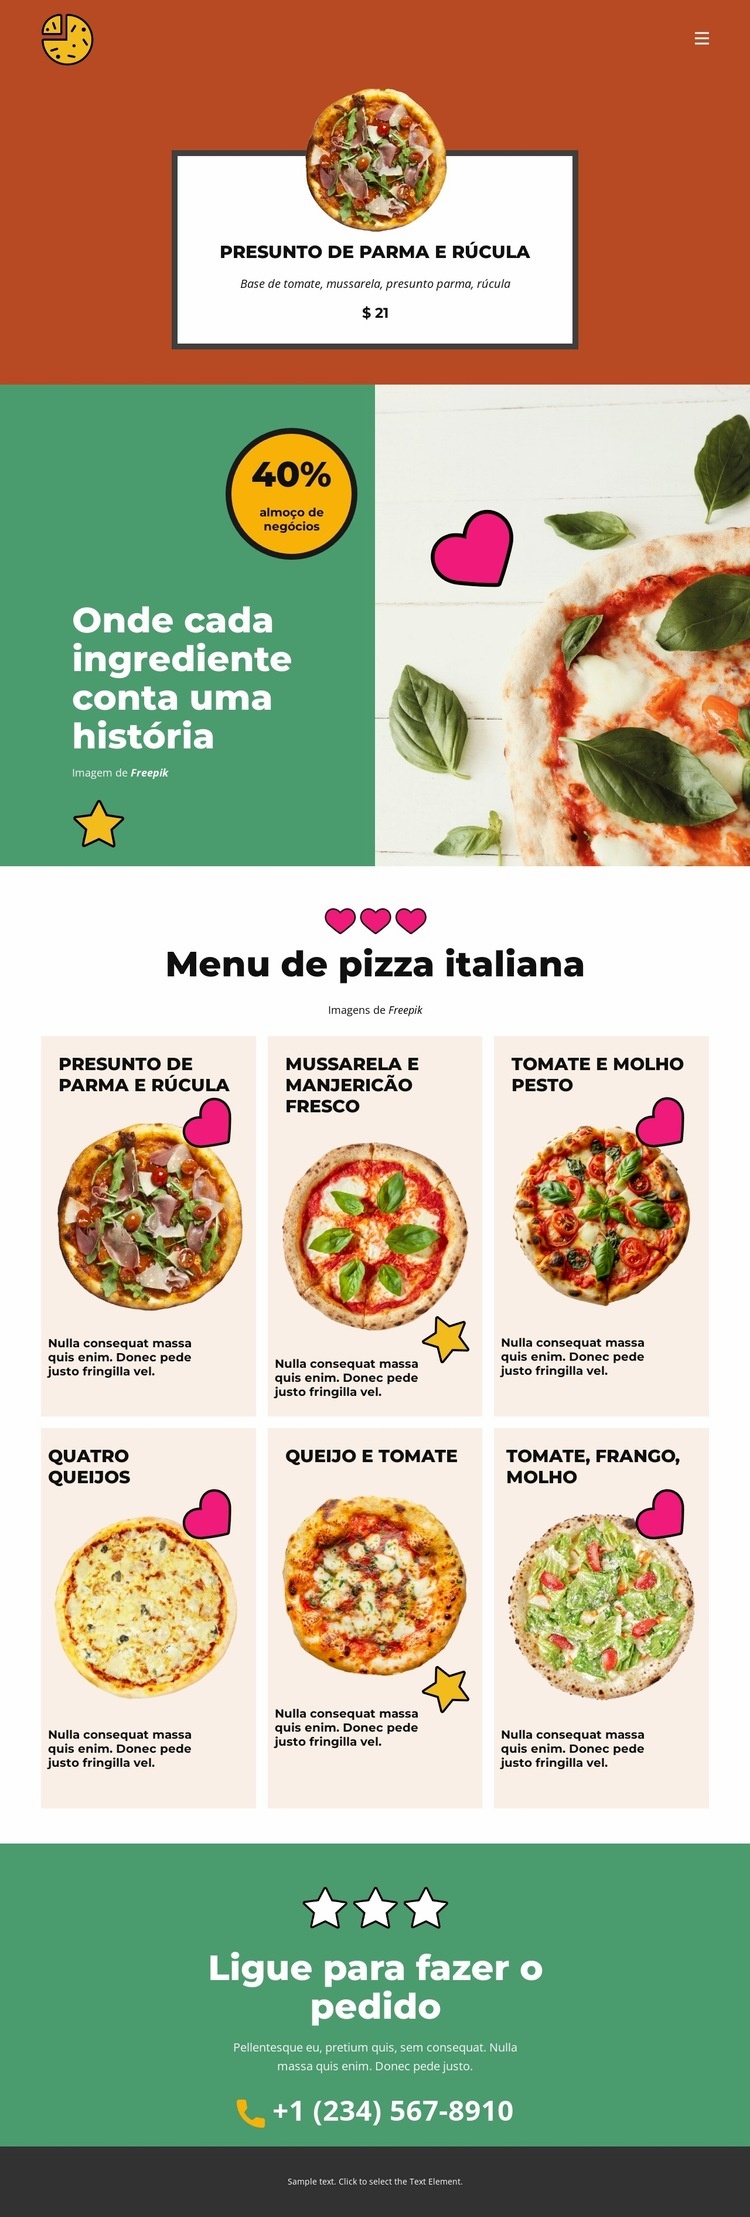 Fun Facts about Pizza Modelo